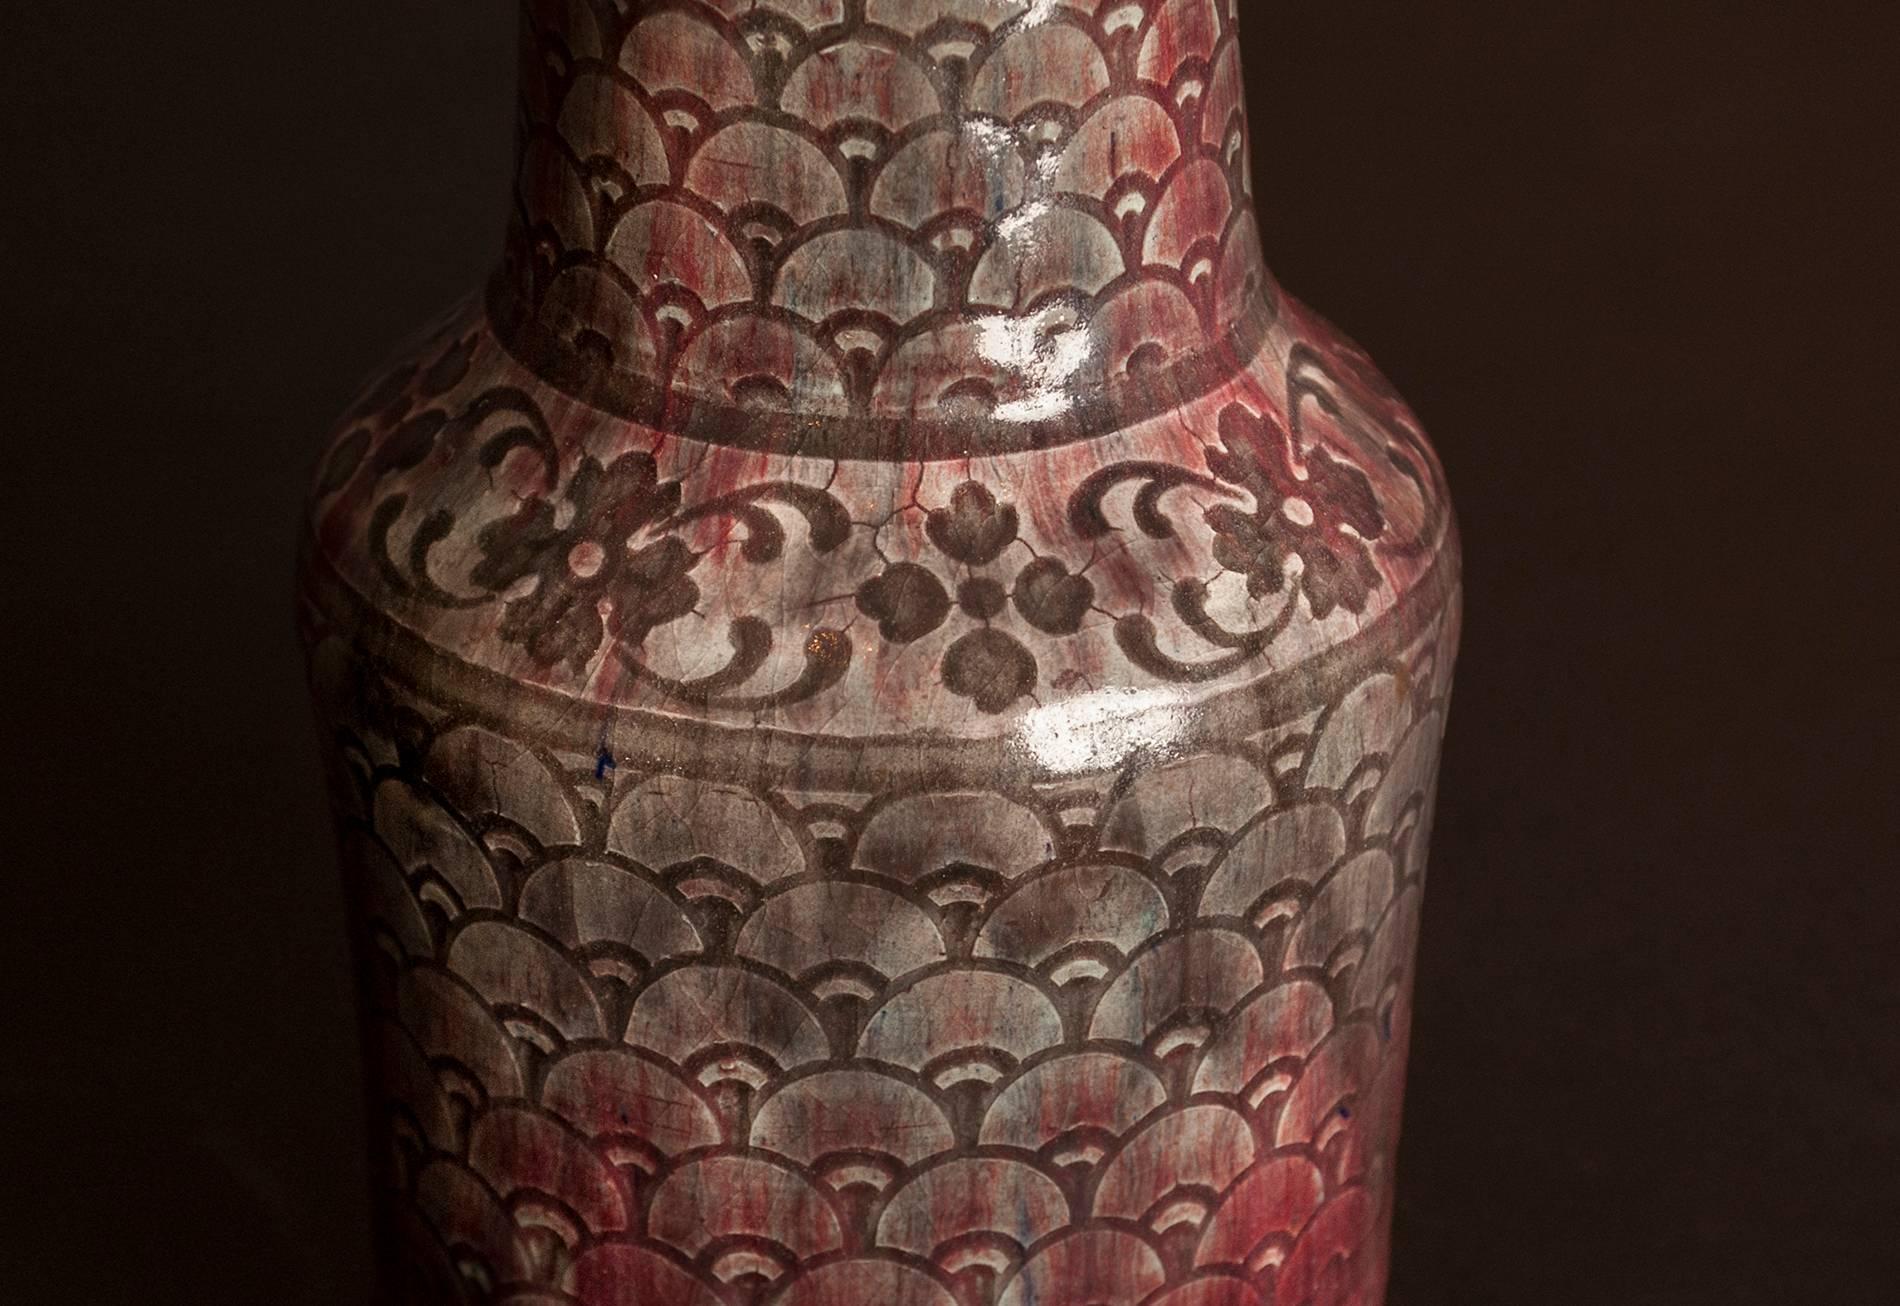 Shell Pattern Vase, by Auguste Delaherche (1857-1940).

Excellent condition. There is a small dimple at the base that occurred during firing. The vase clearly met Delaherche’s exacting standards, as he did not see fit to have it destroyed. The vase